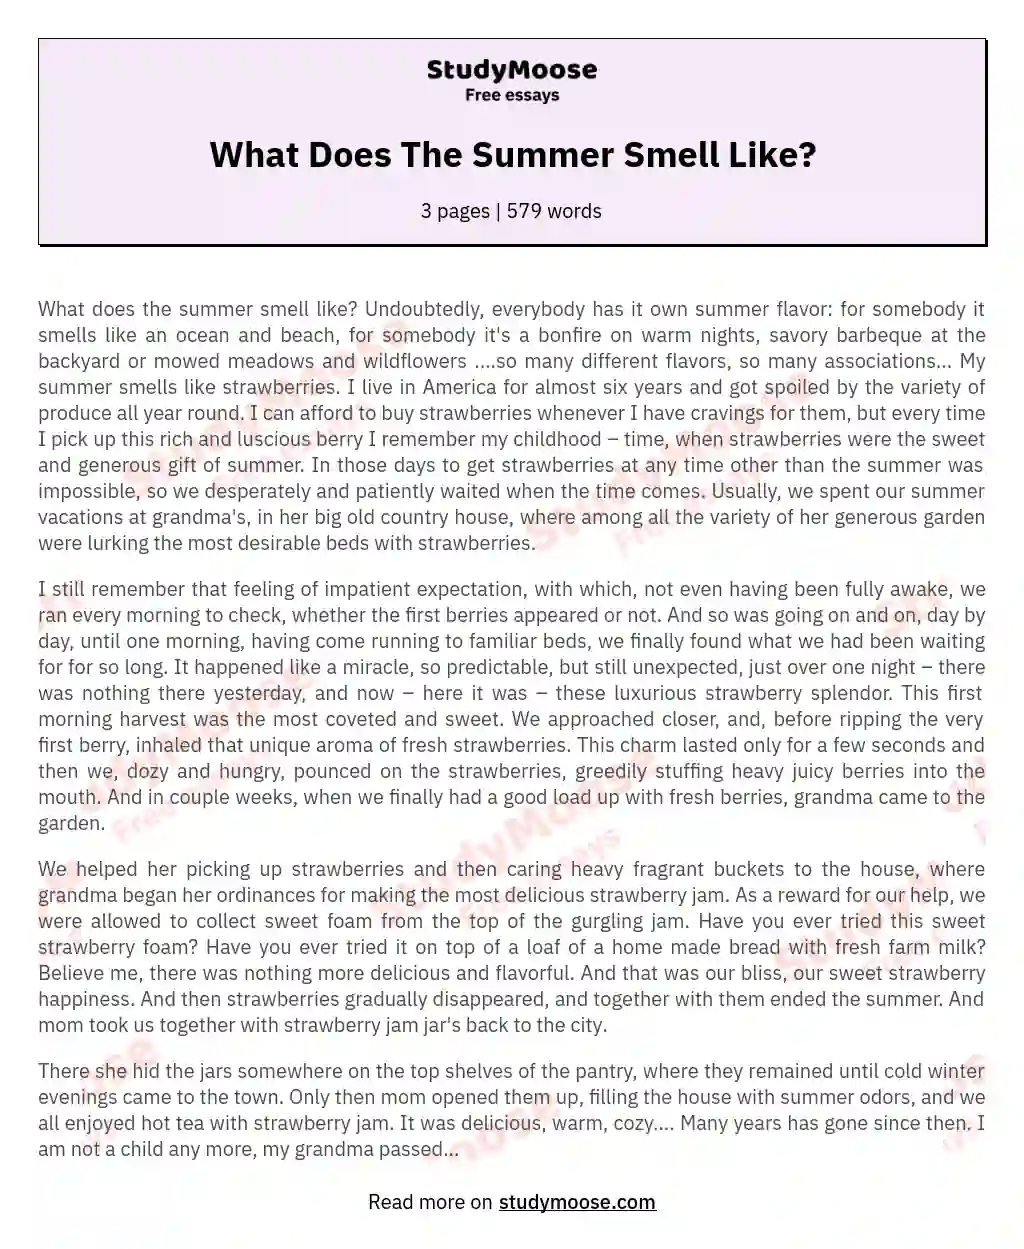 What Does The Summer Smell Like? essay